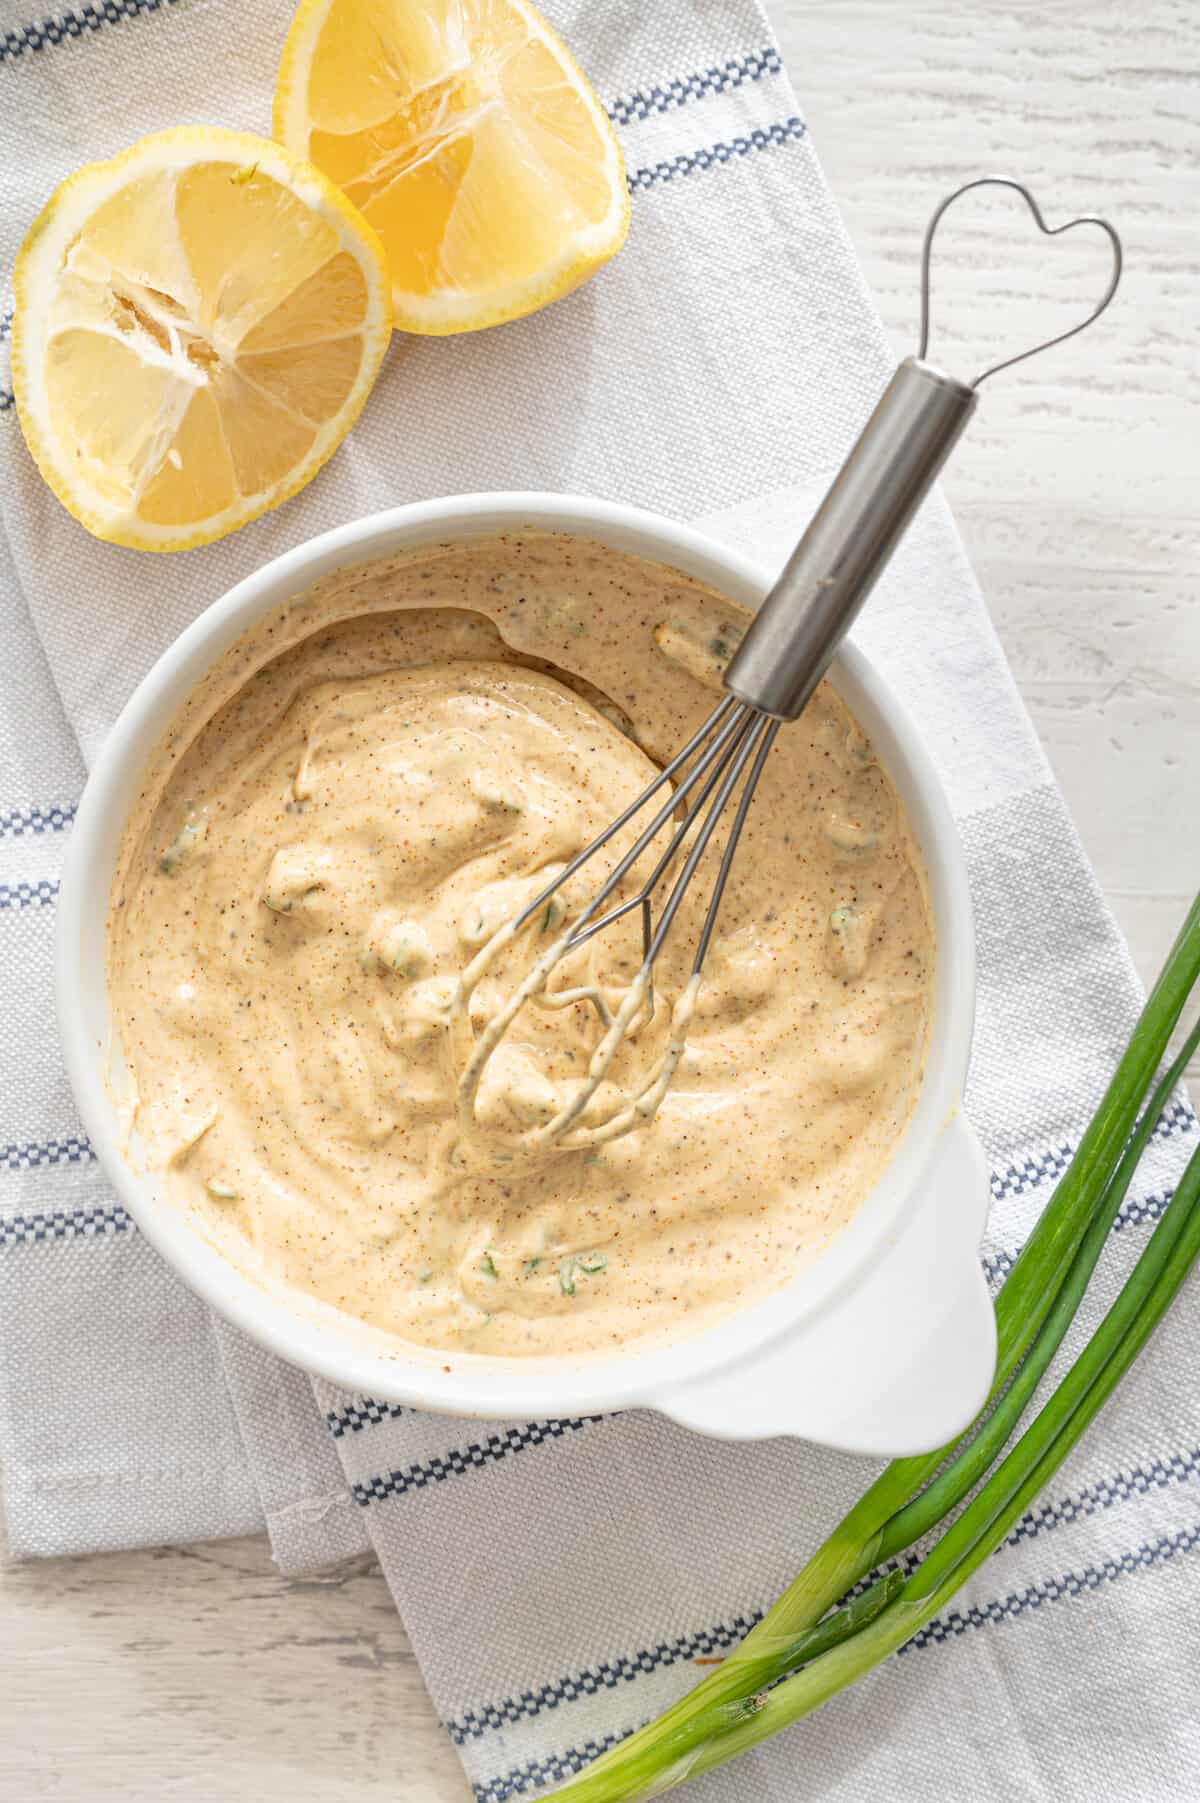 Whisking easy Cajun remoulade sauce ingredients together in a bowl.